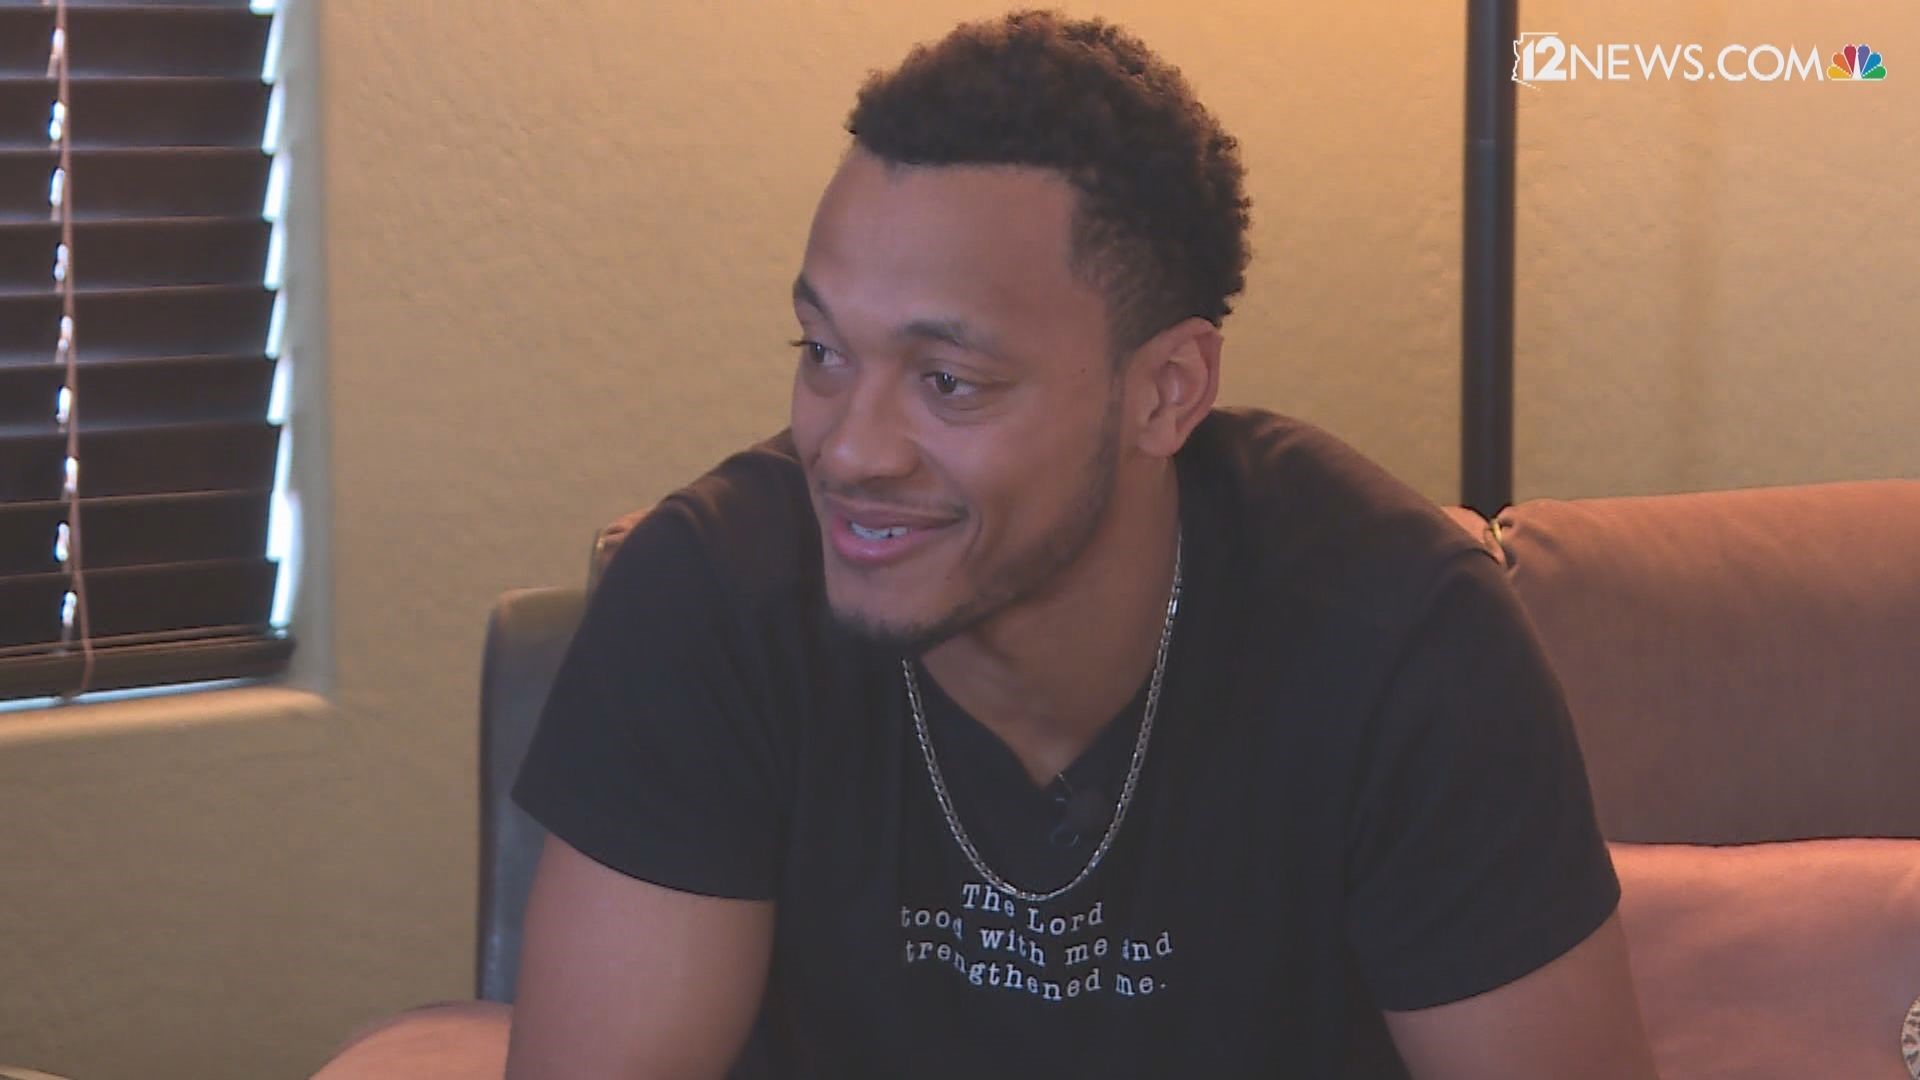 Former Chandler High School standout Brett Hundley has signed a one-year contract to play for the hometown Arizona Cardinals.